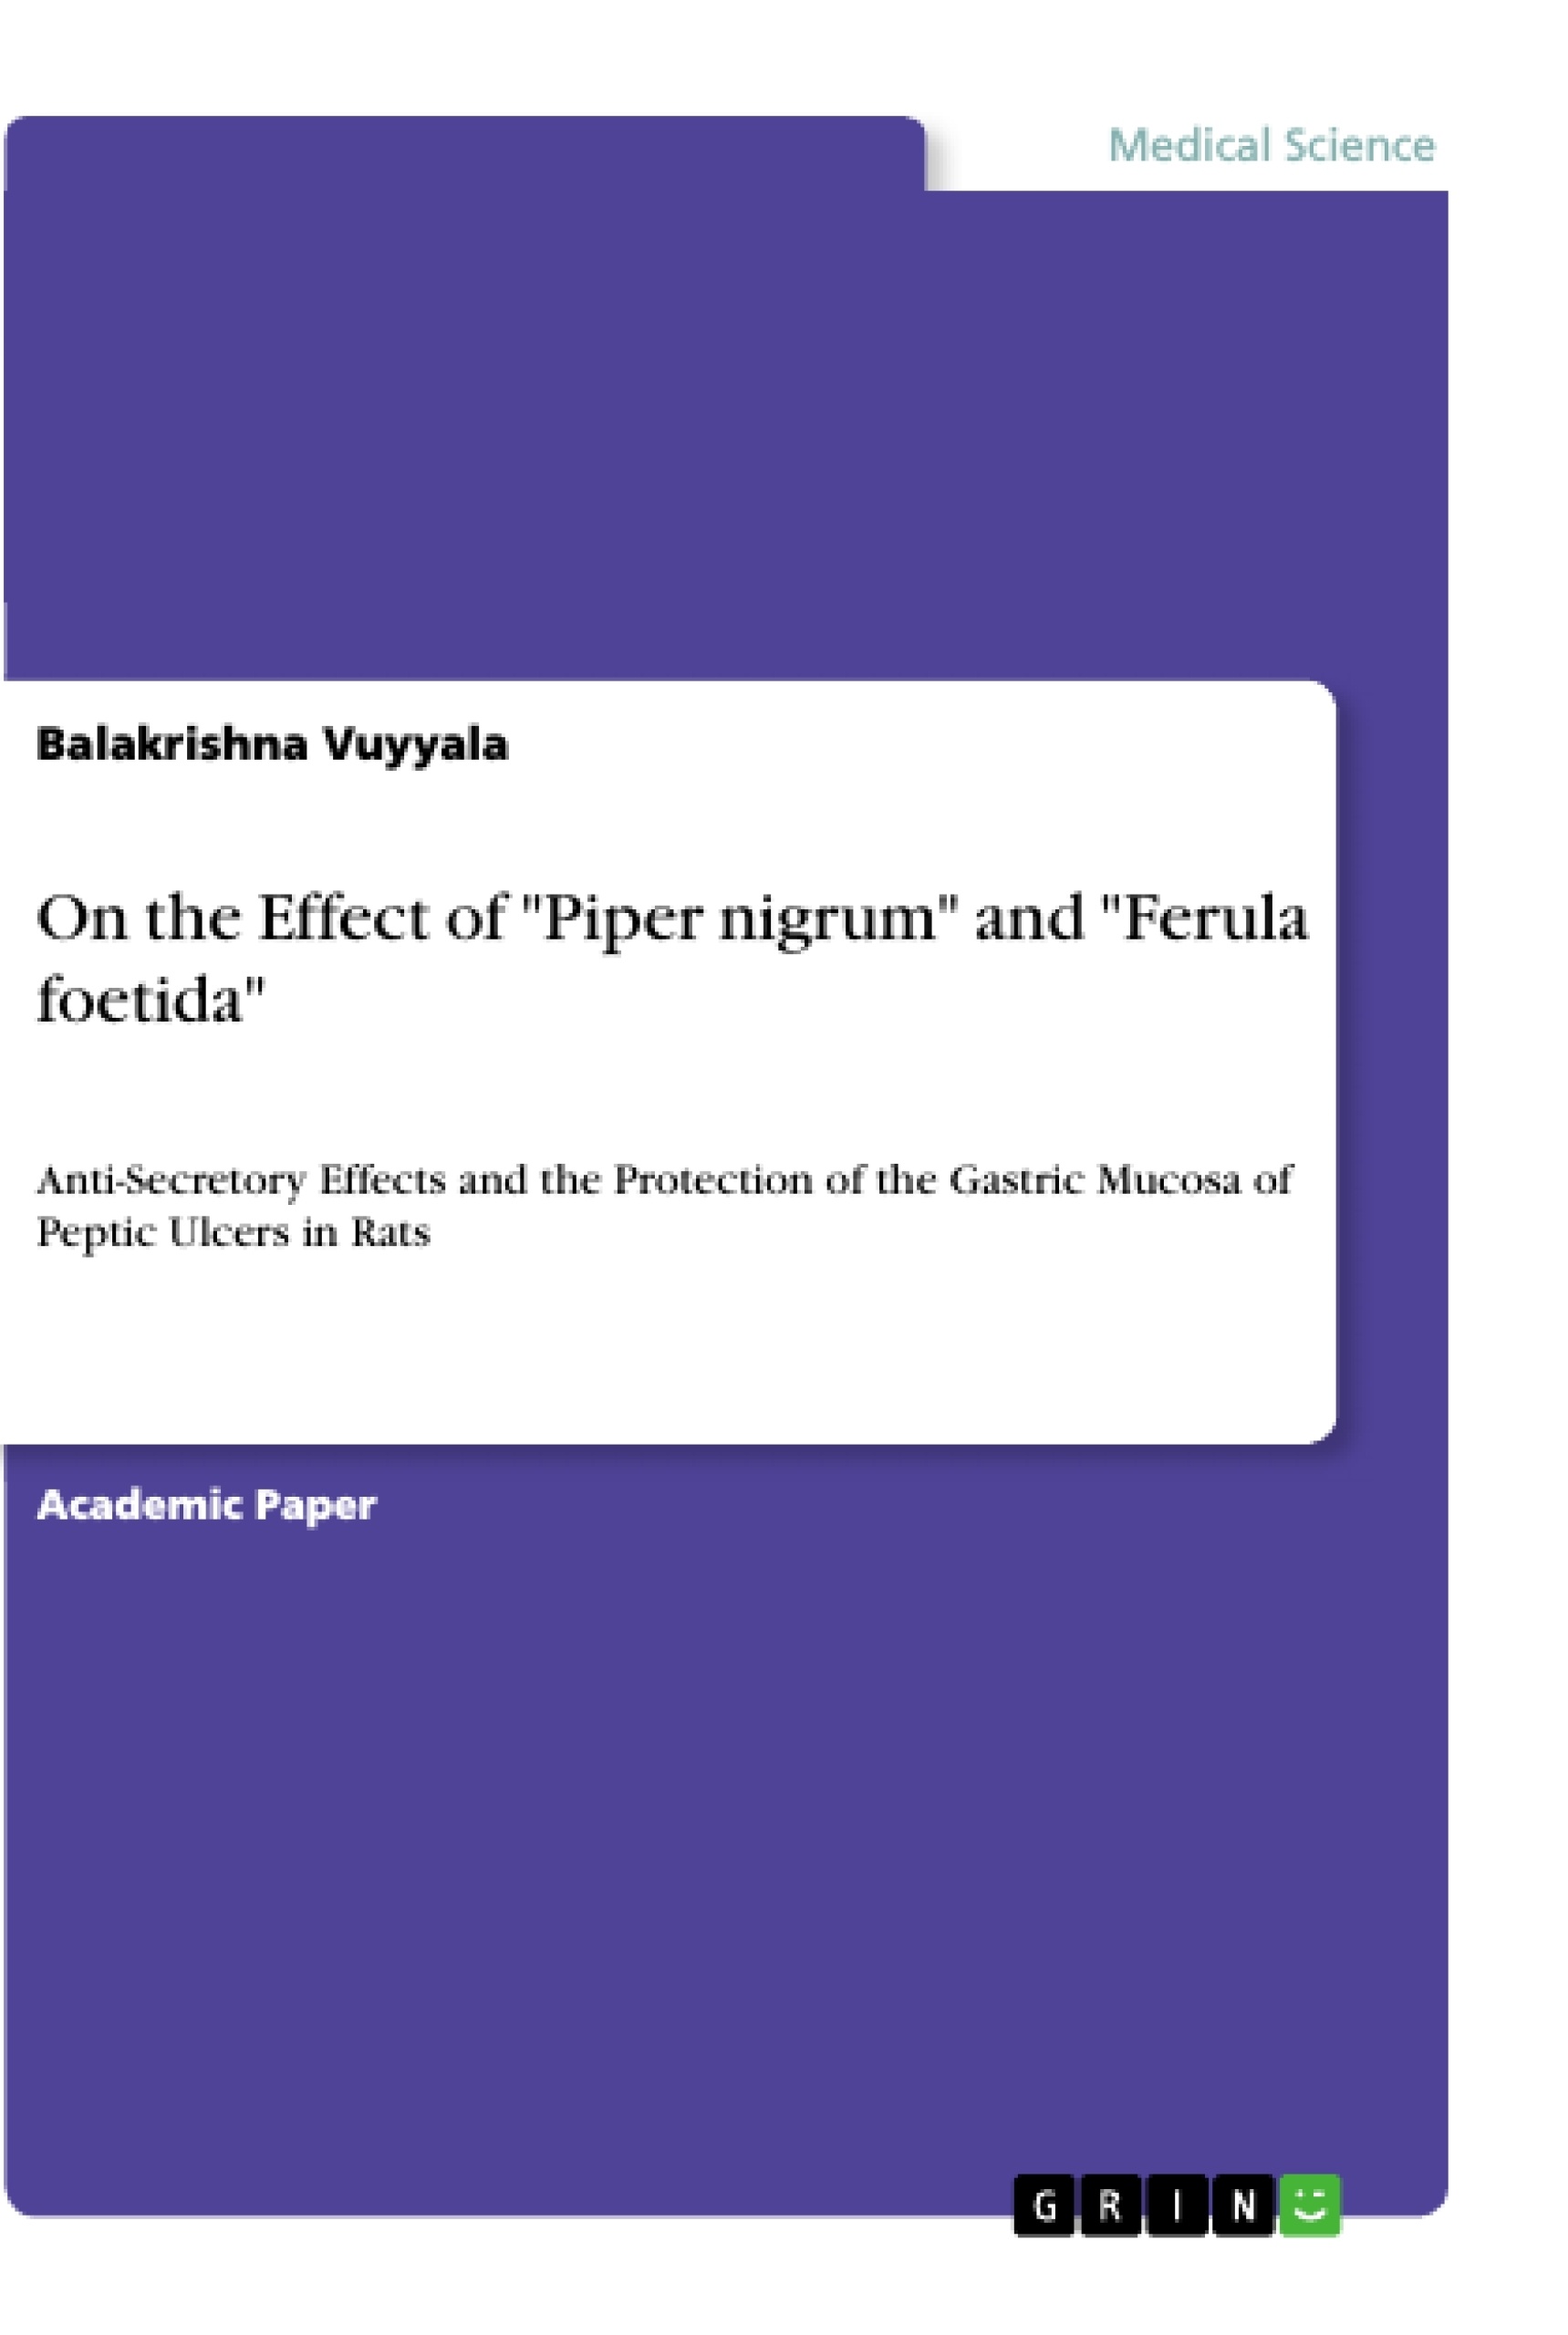 Título: On the Effect of "Piper nigrum" and "Ferula foetida"